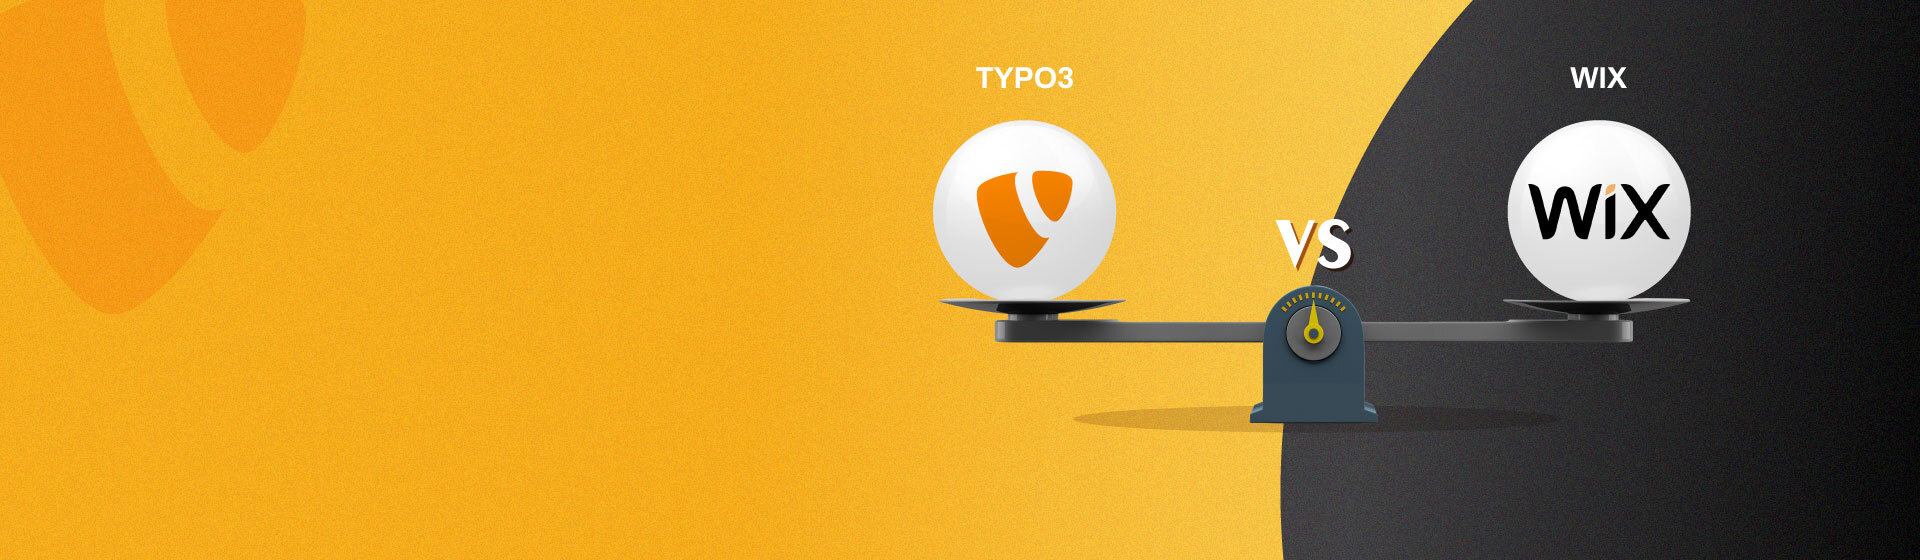 TYPO3 Vs Wix - Which One is Better?